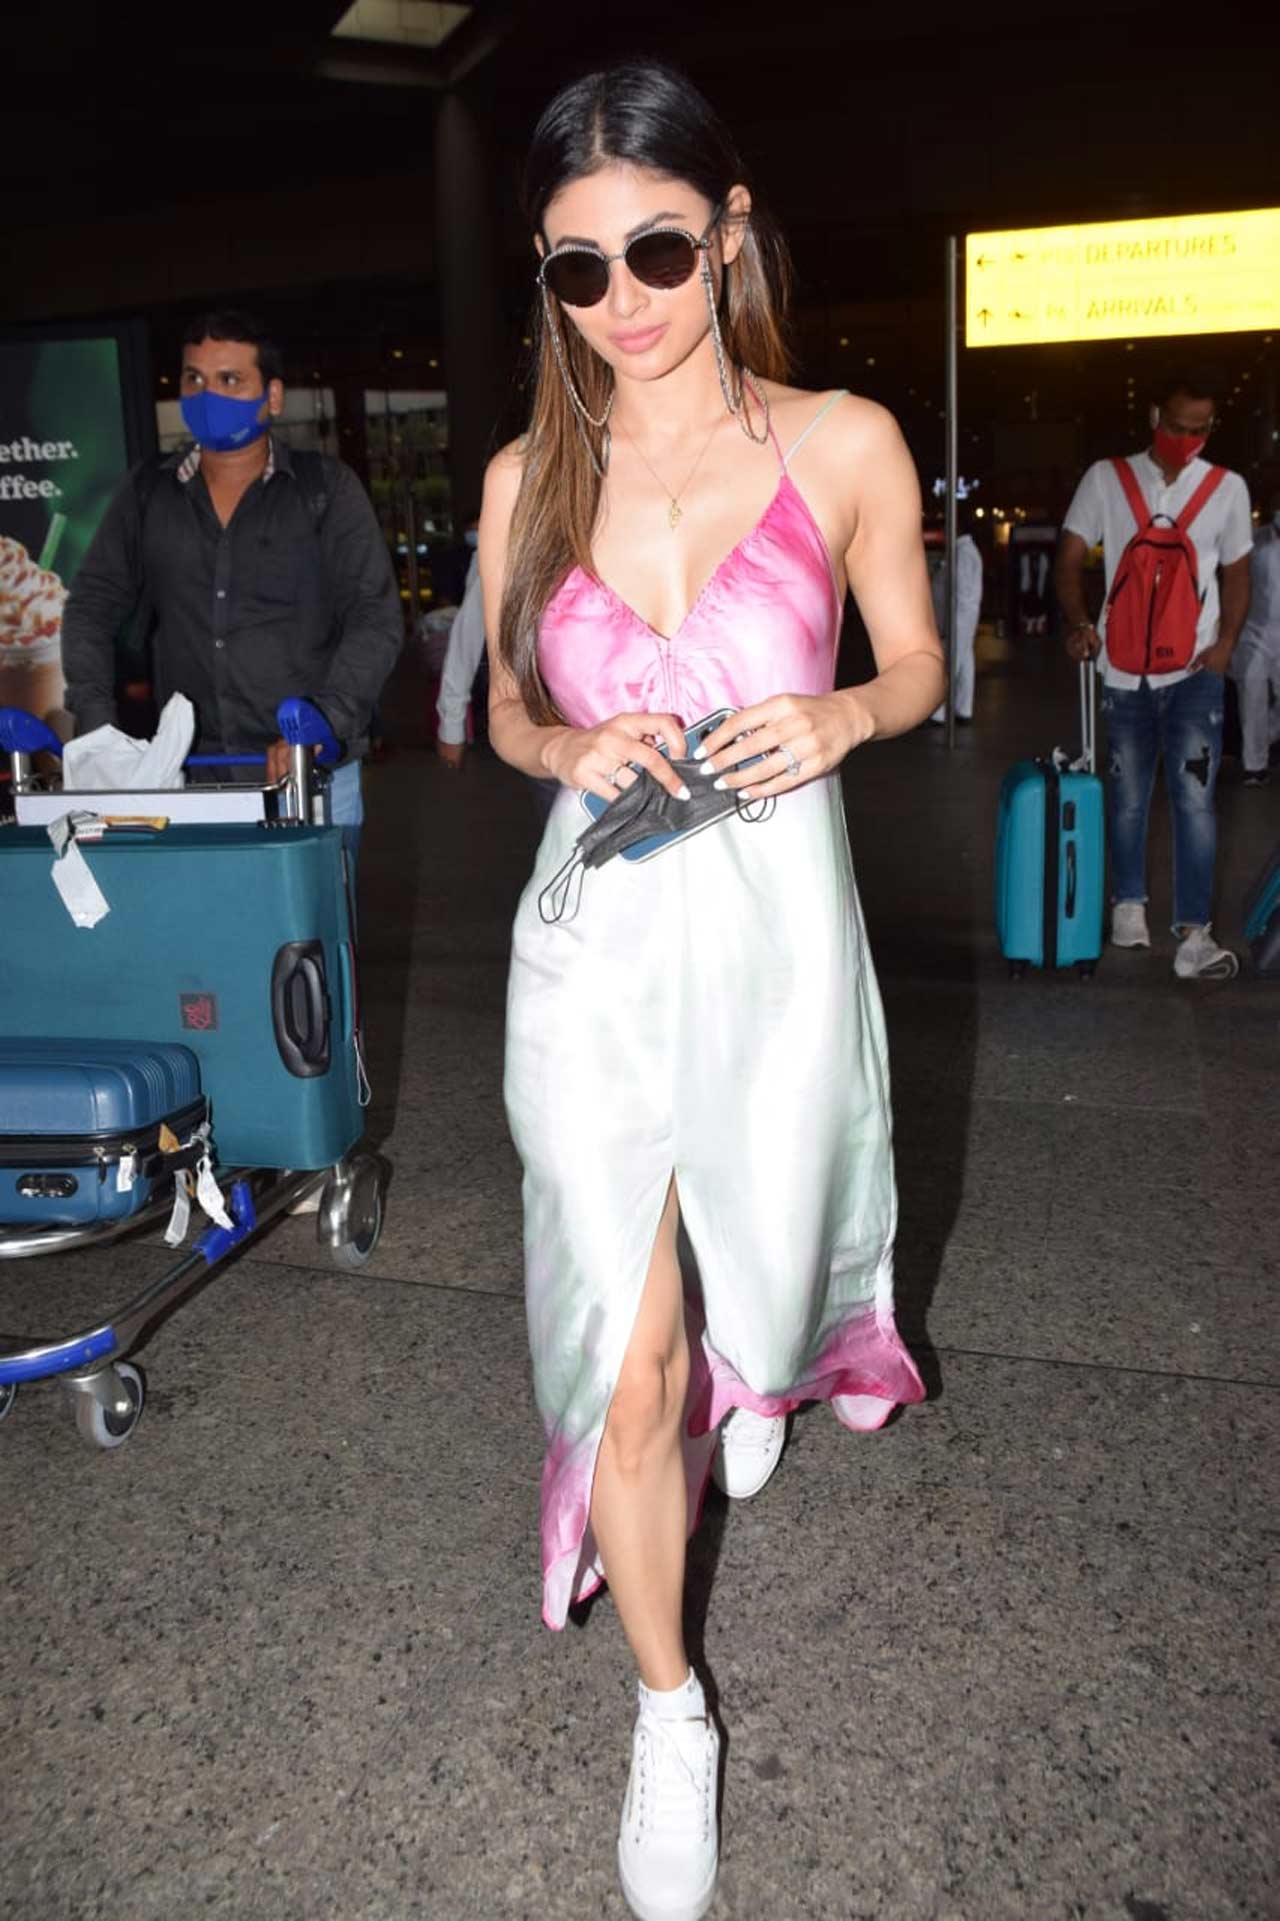 Mouni Roy stunned in a tie-dye satin thigh-high slit maxi dress when clicked at the Mumbai airport. The actress completed her casual look with a pair of white sneakers. On the work front, Mouni will be next seen in Brahmastra, an Ayan Mukerji directorial venture.